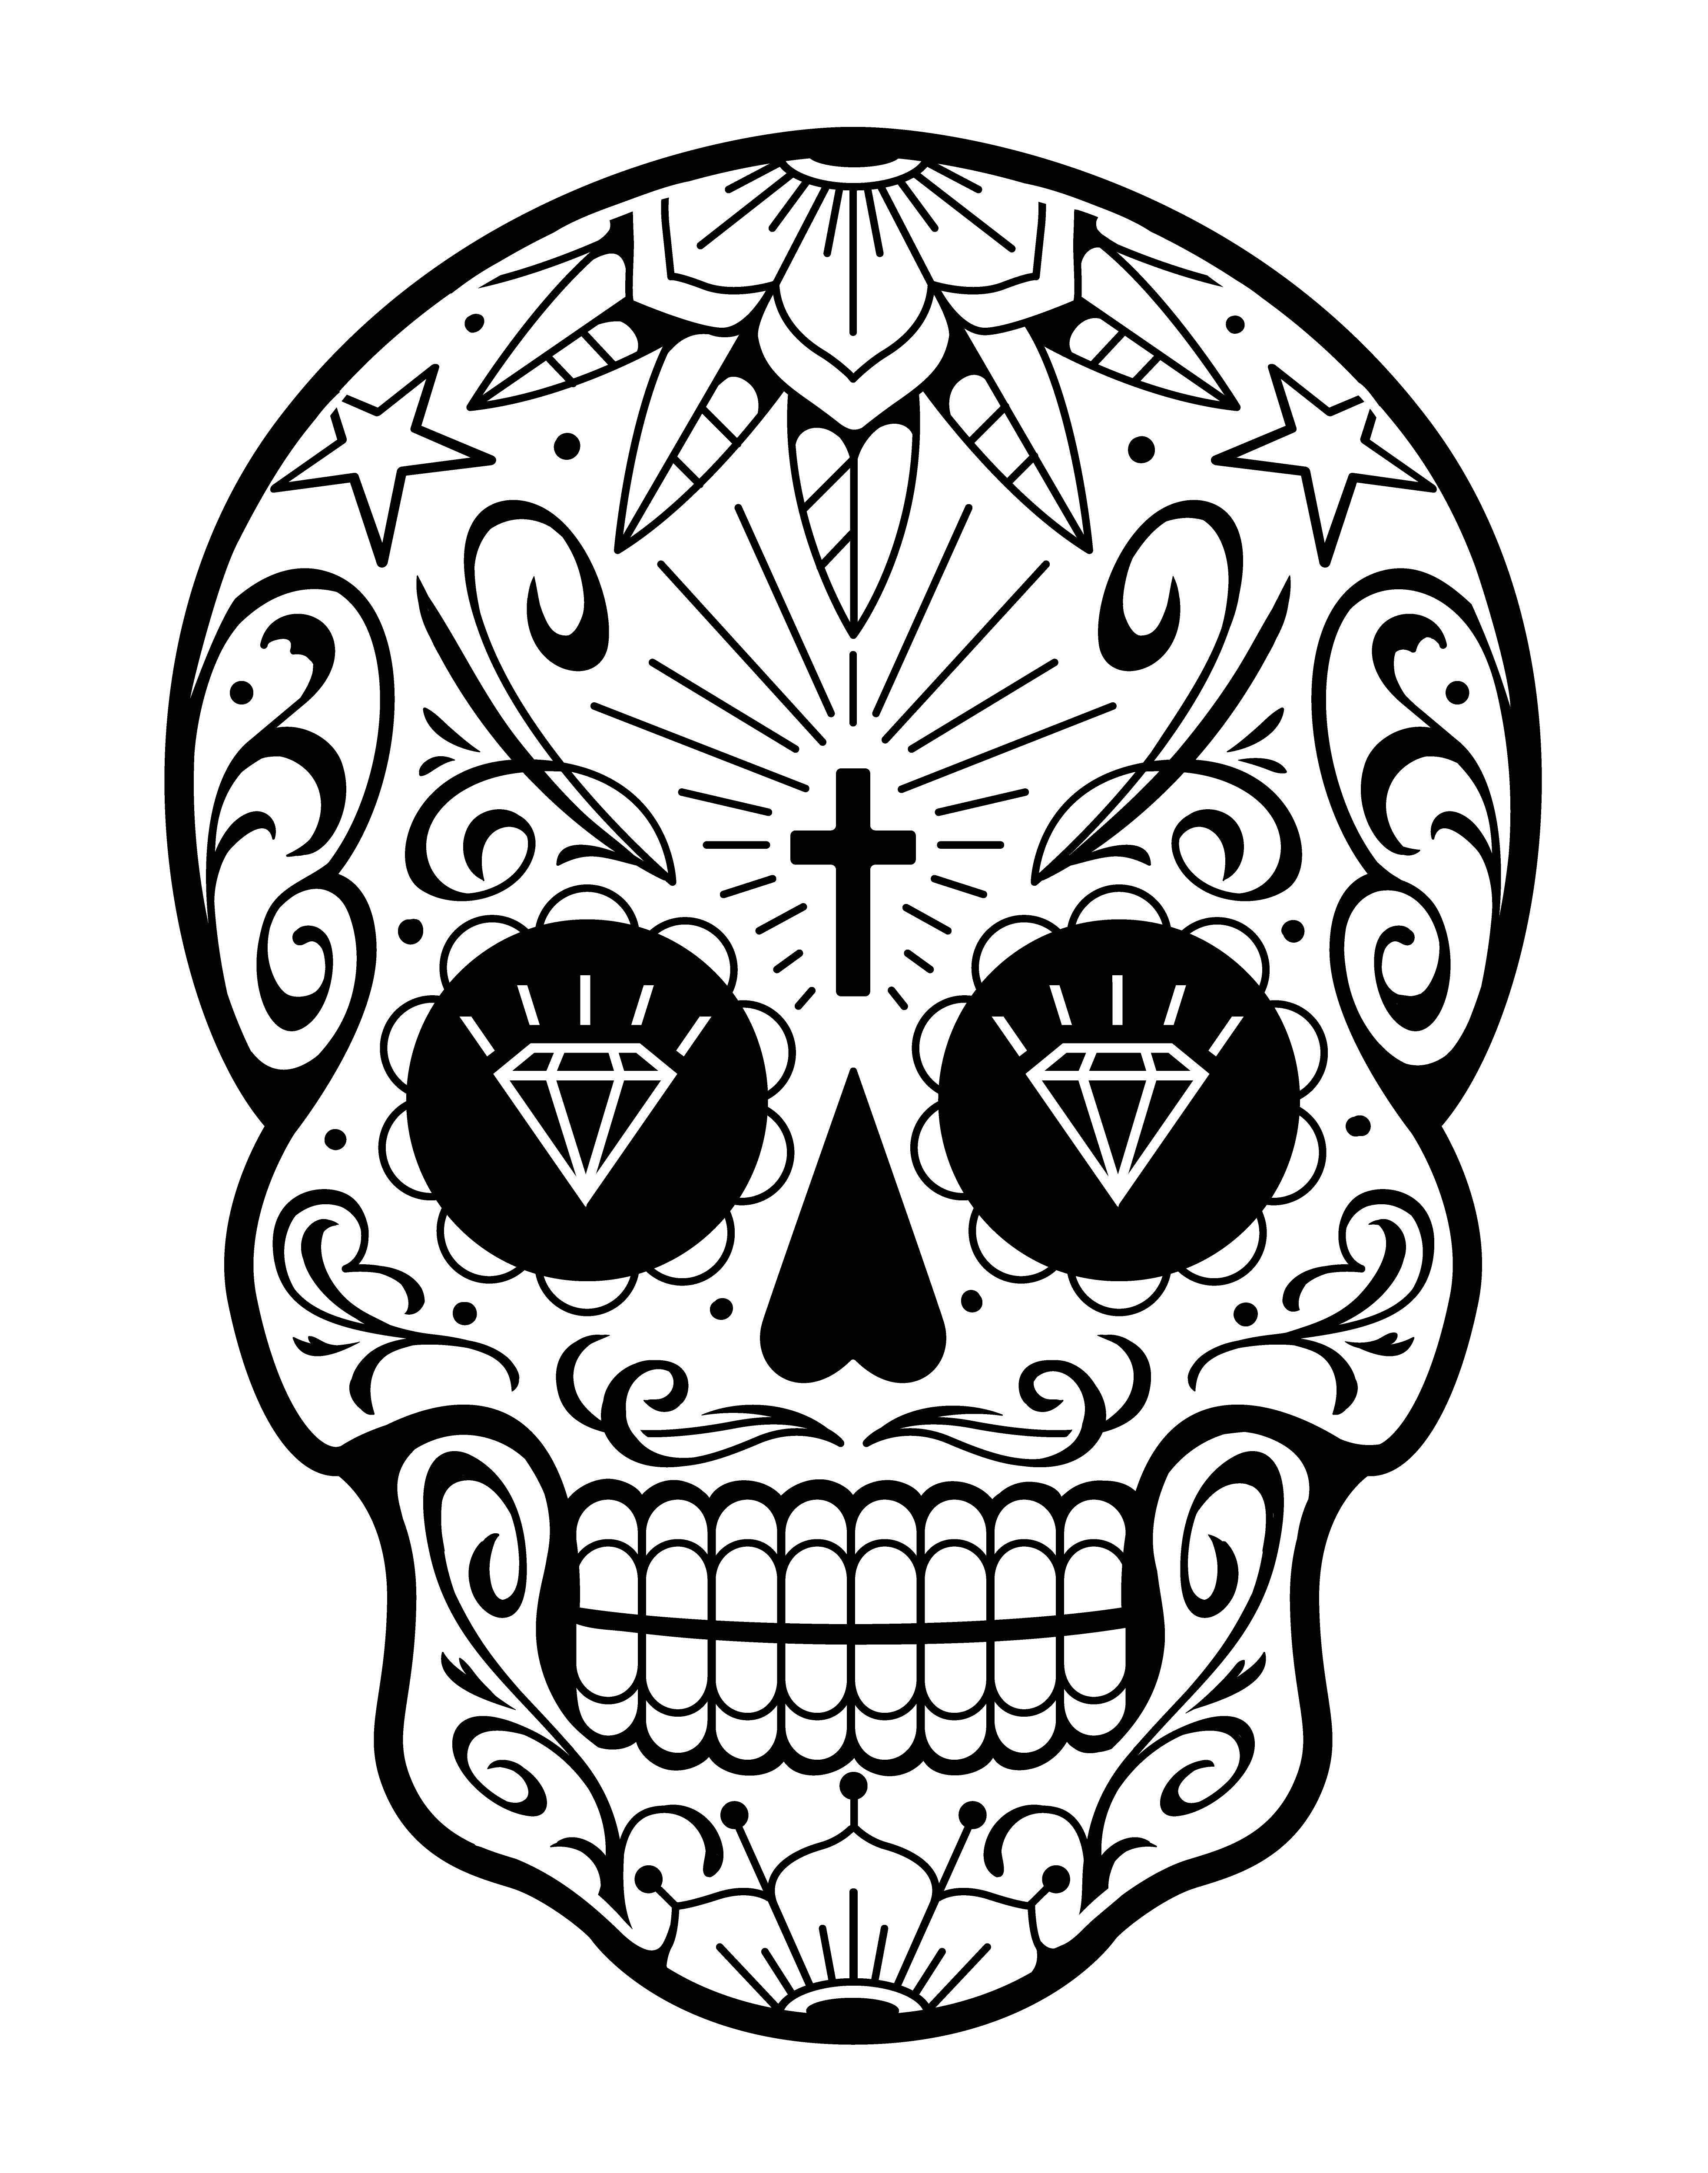 Download the Vector Mexican Skull with Patterns 331479